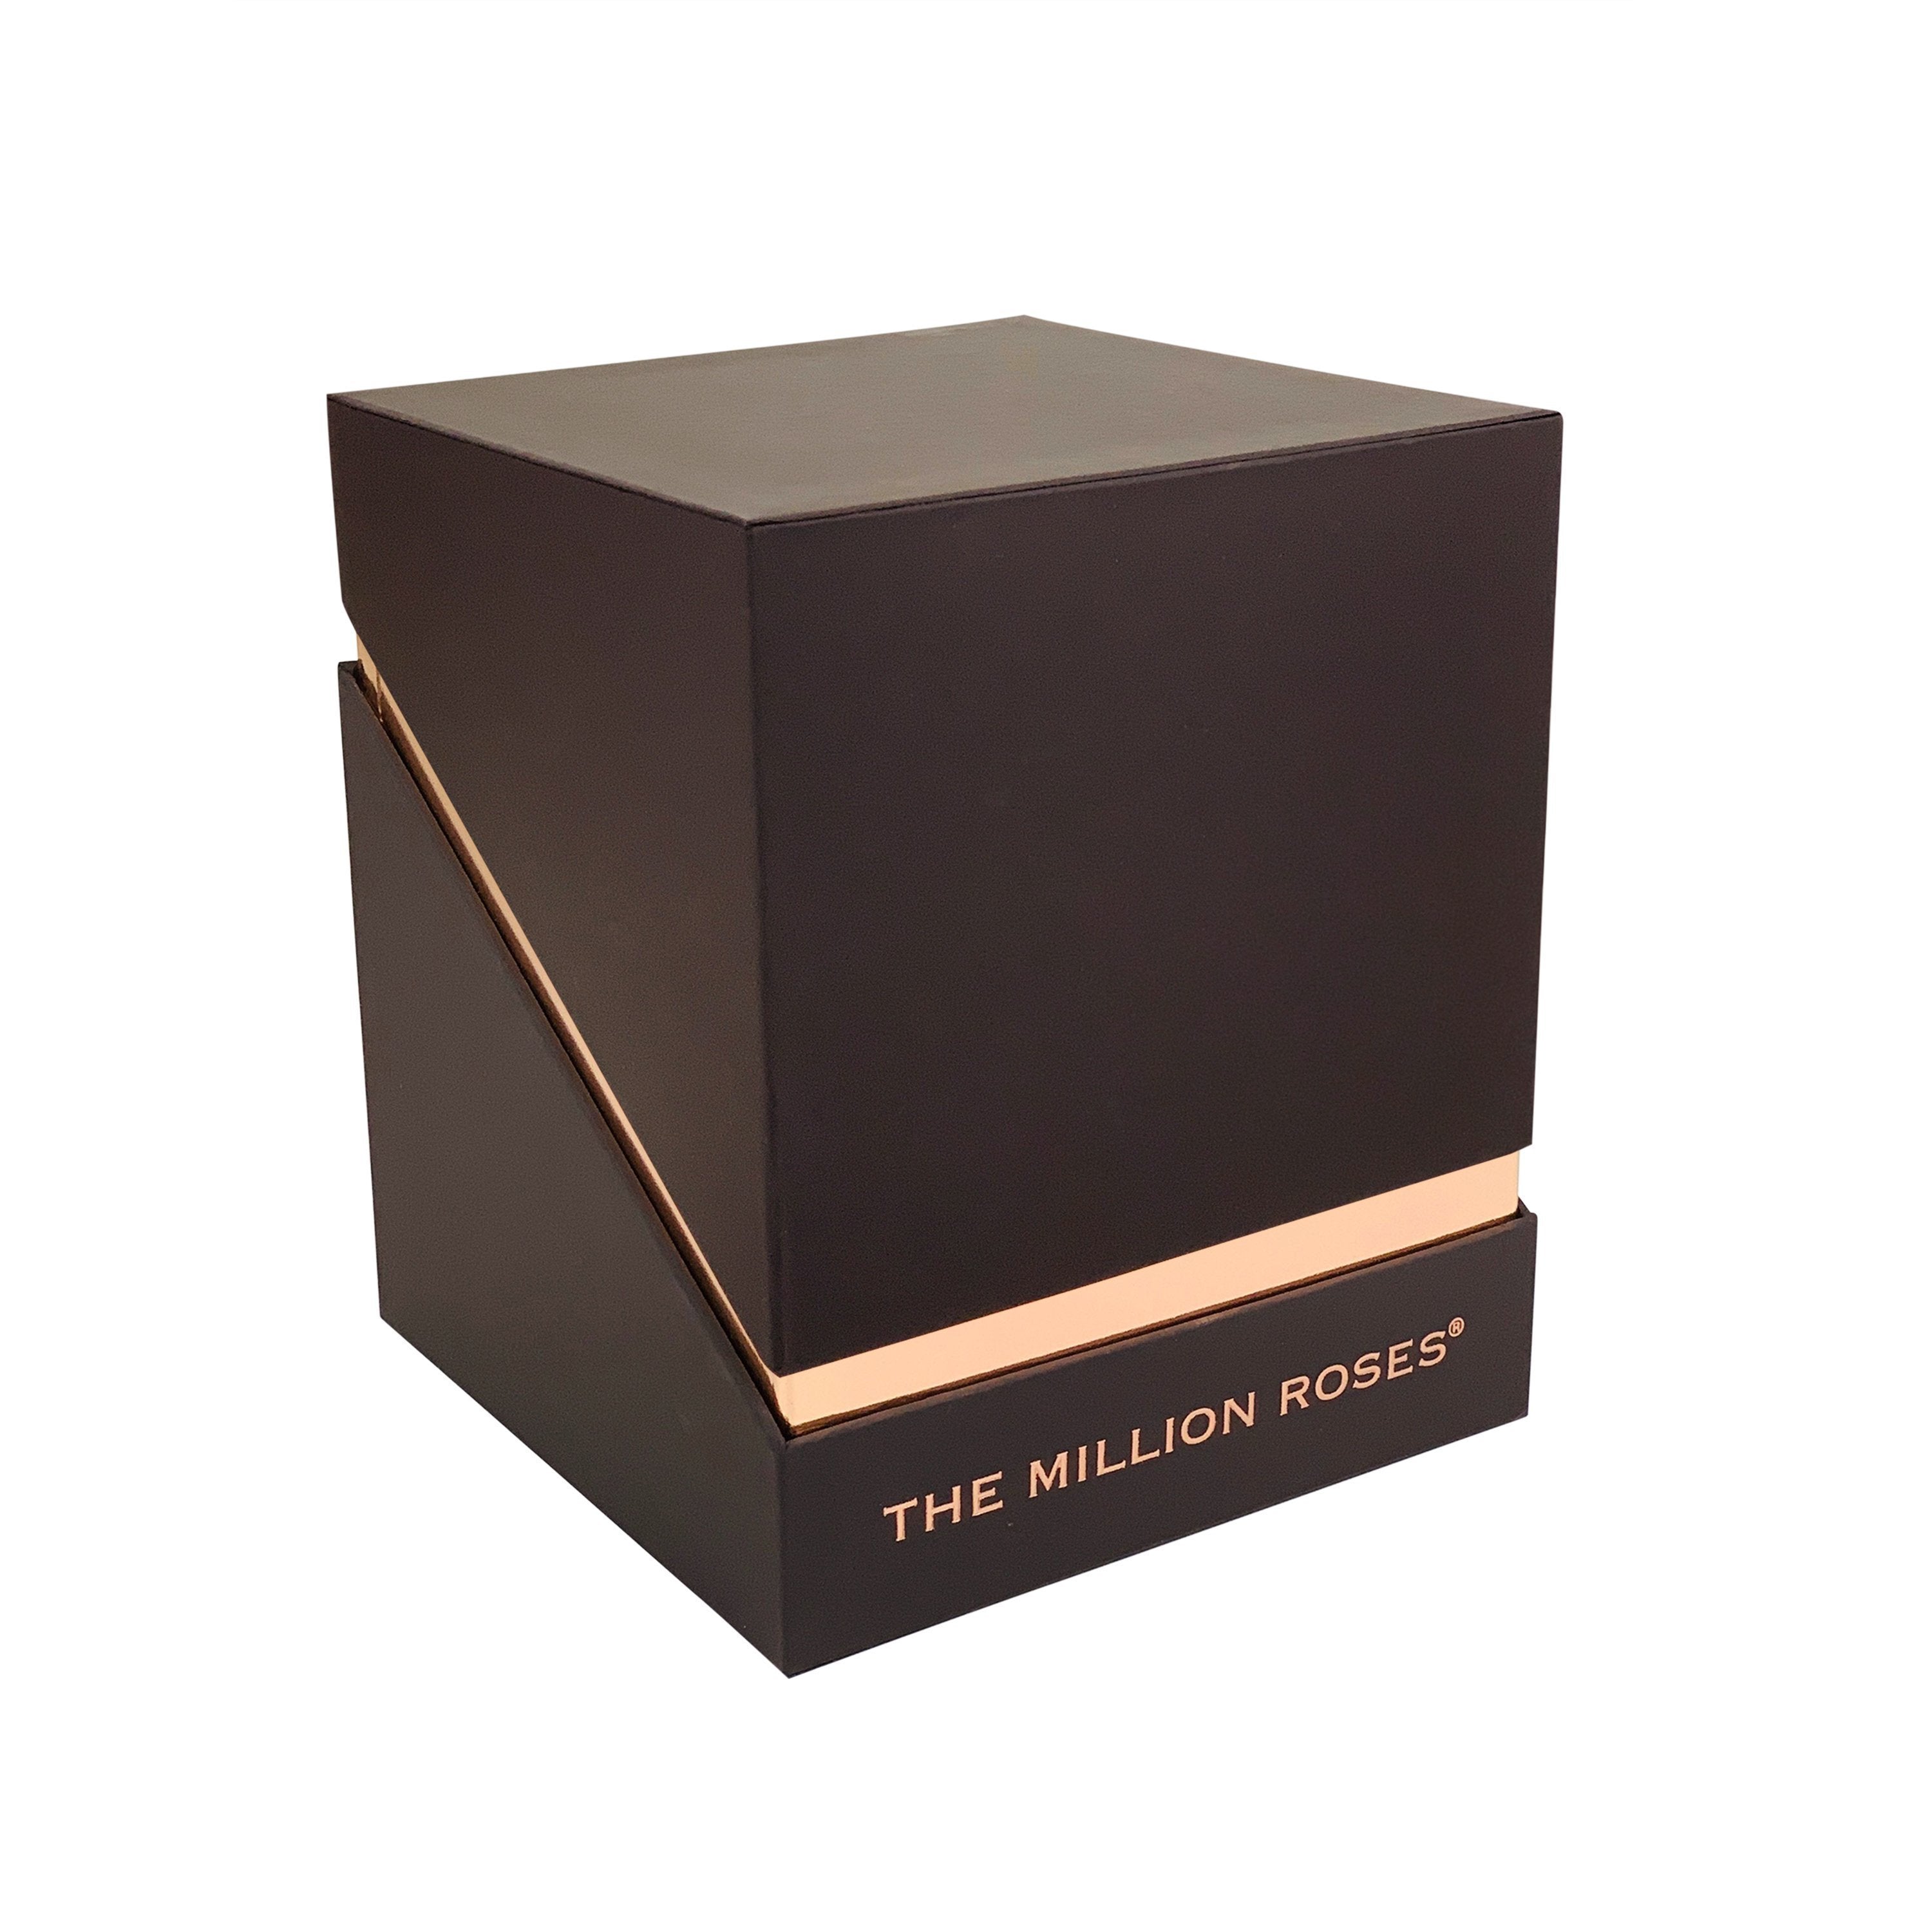 The Square - Coffee Box - Neon Green Roses